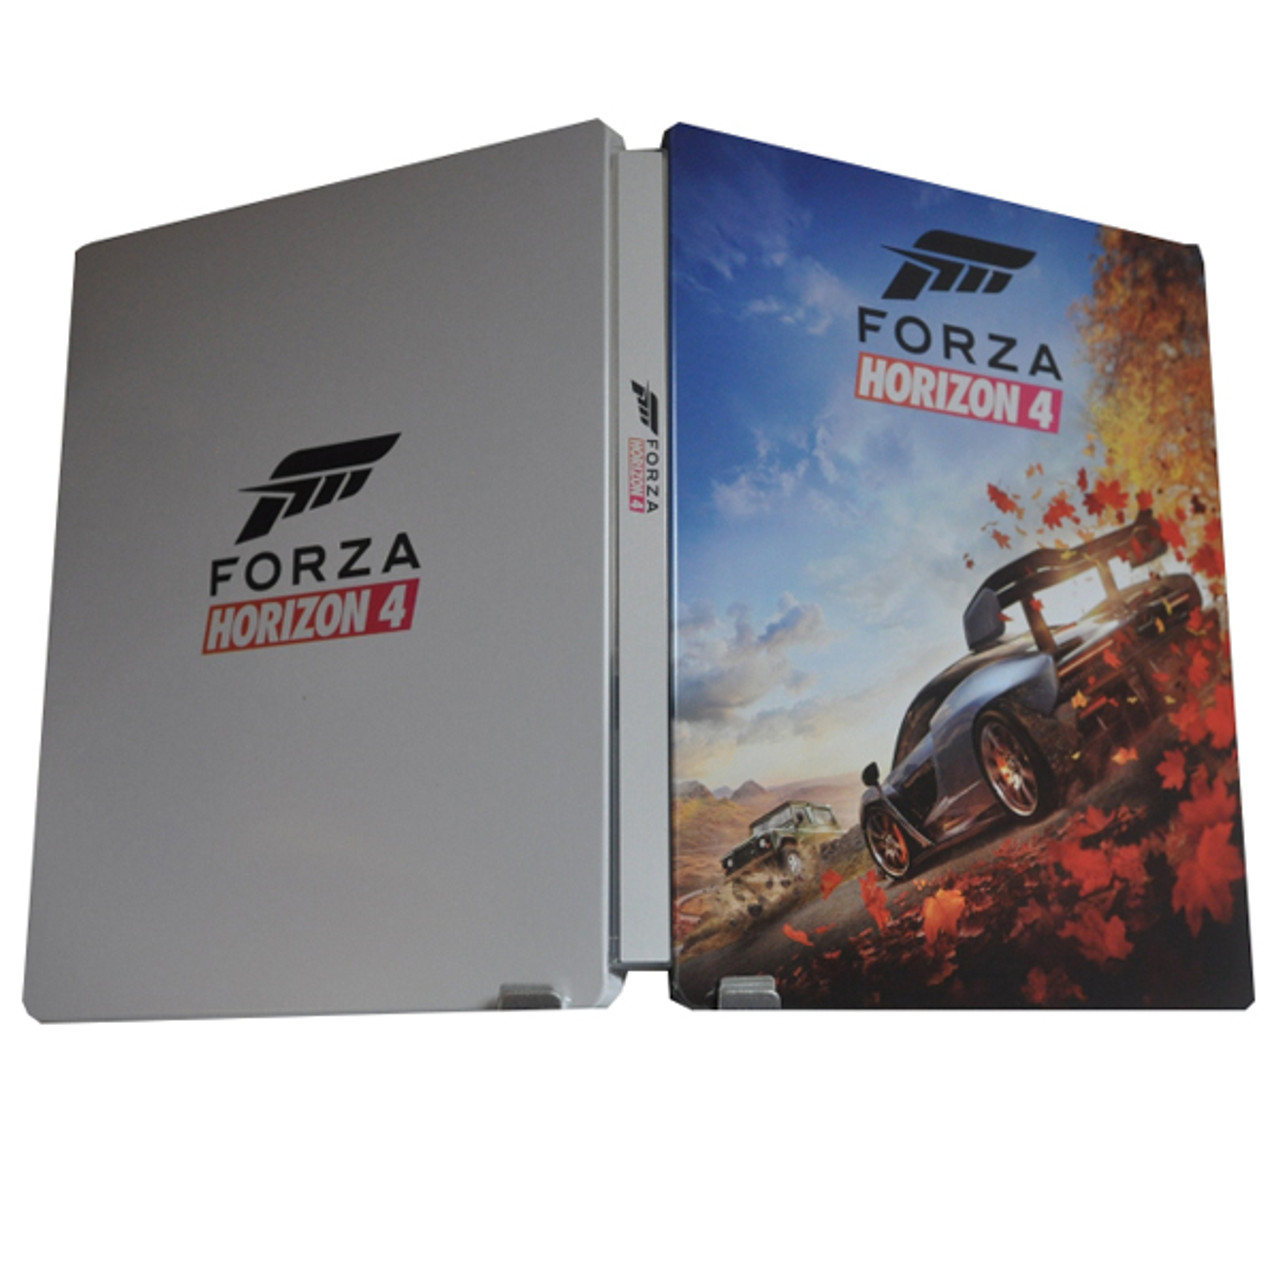 Forza Horizon 4 Xbox One Game and Ultimate Edition Steelbook